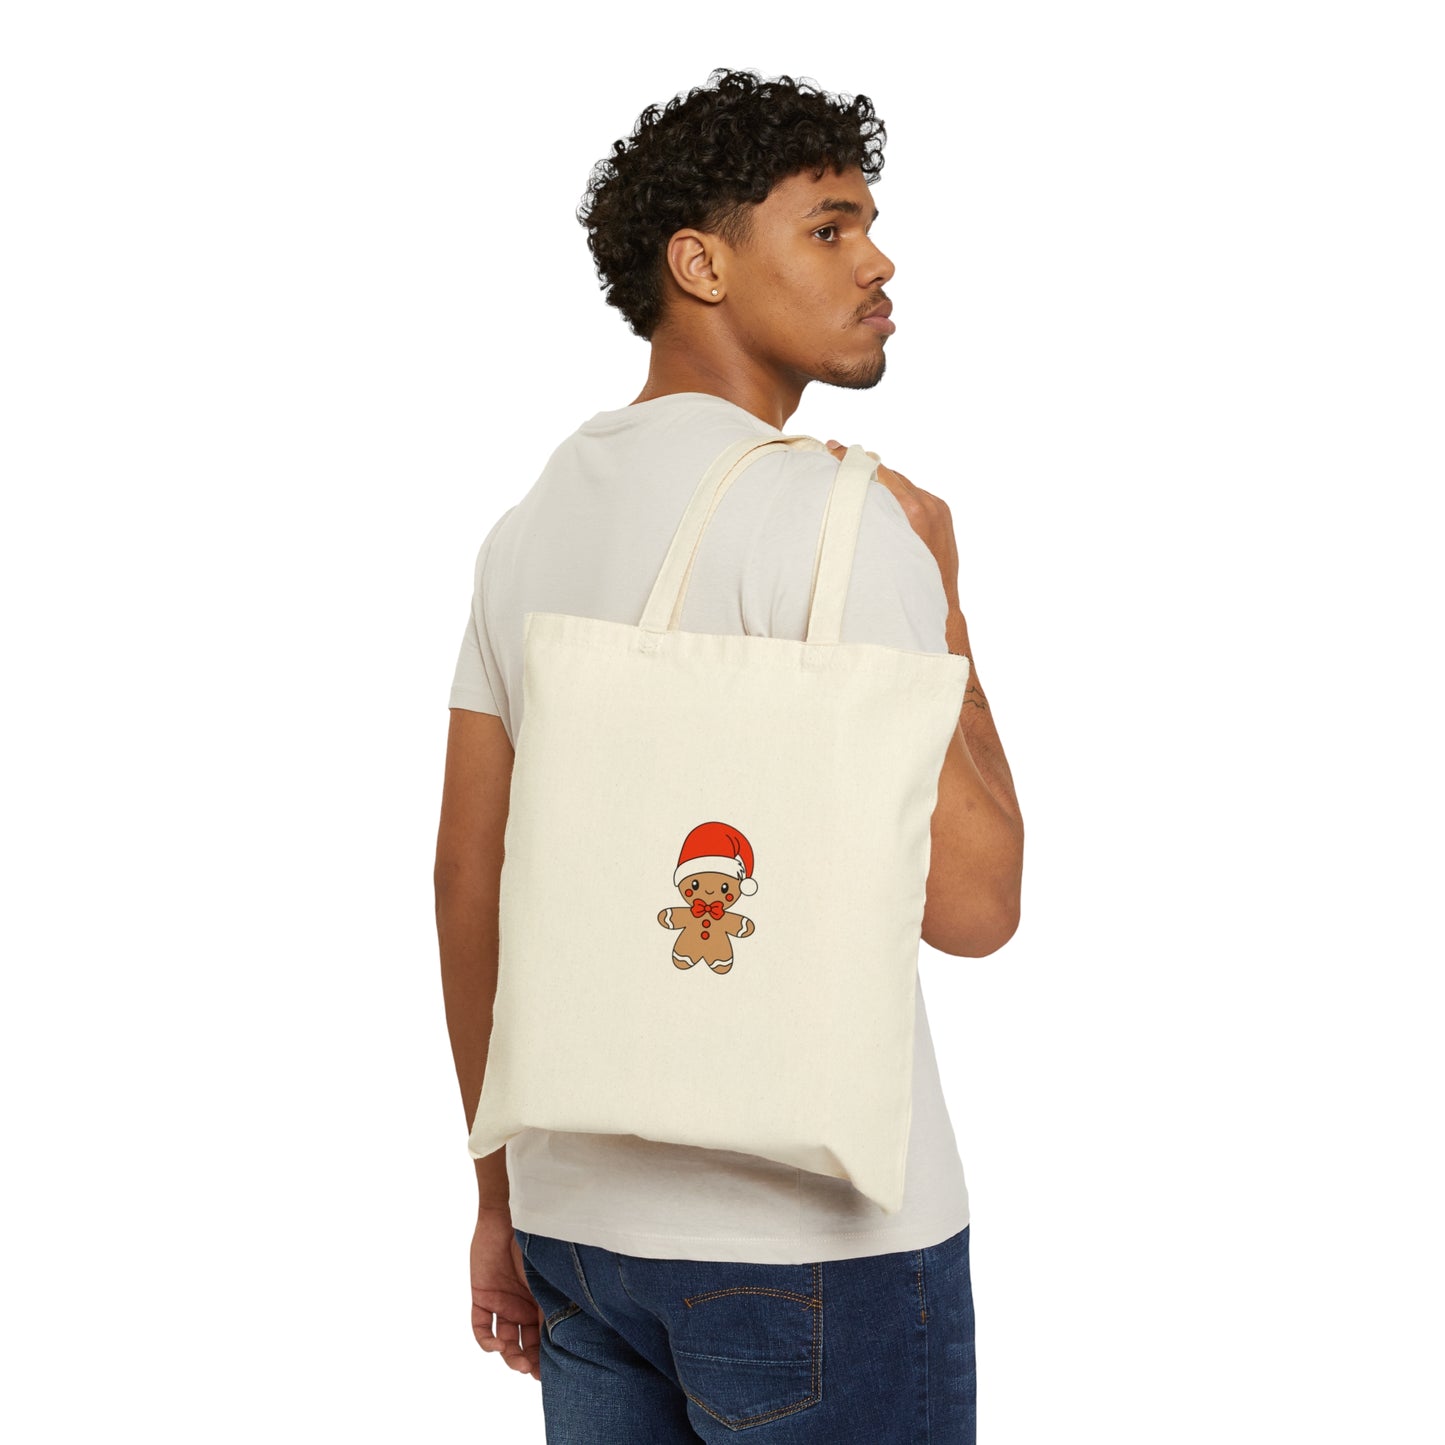 Cute Gingerbread - Christmas Tote Bag - Cotton Canvas Tote Bag